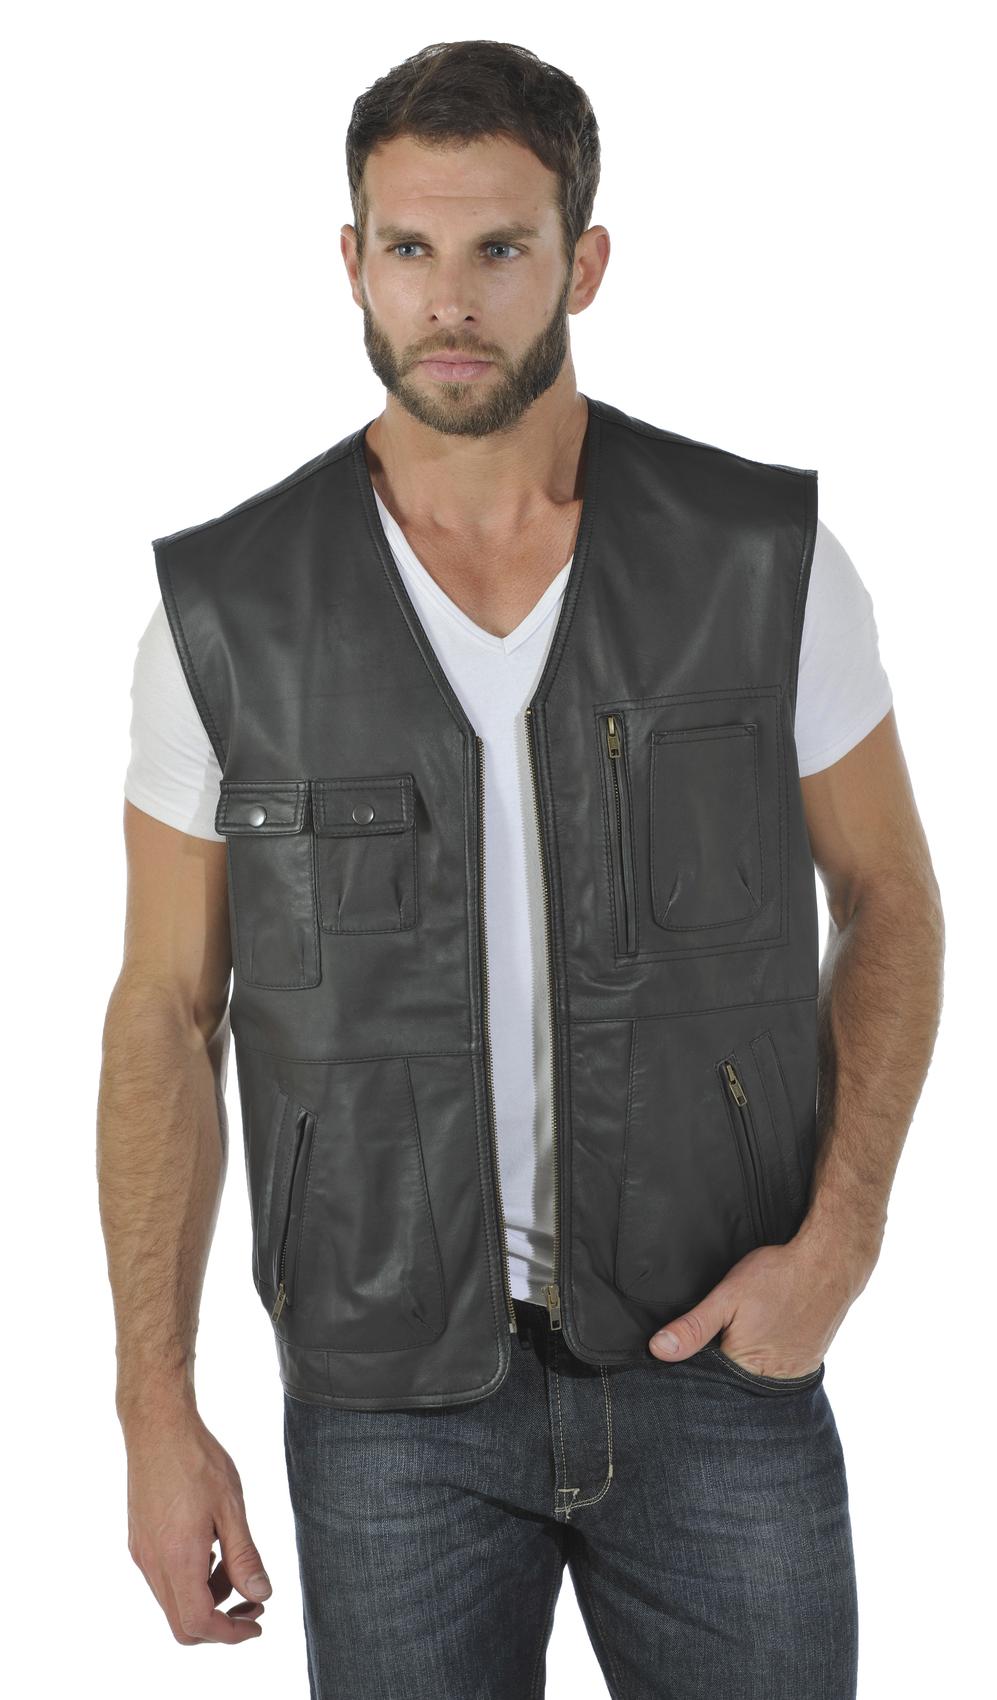 gilet multipoches femme